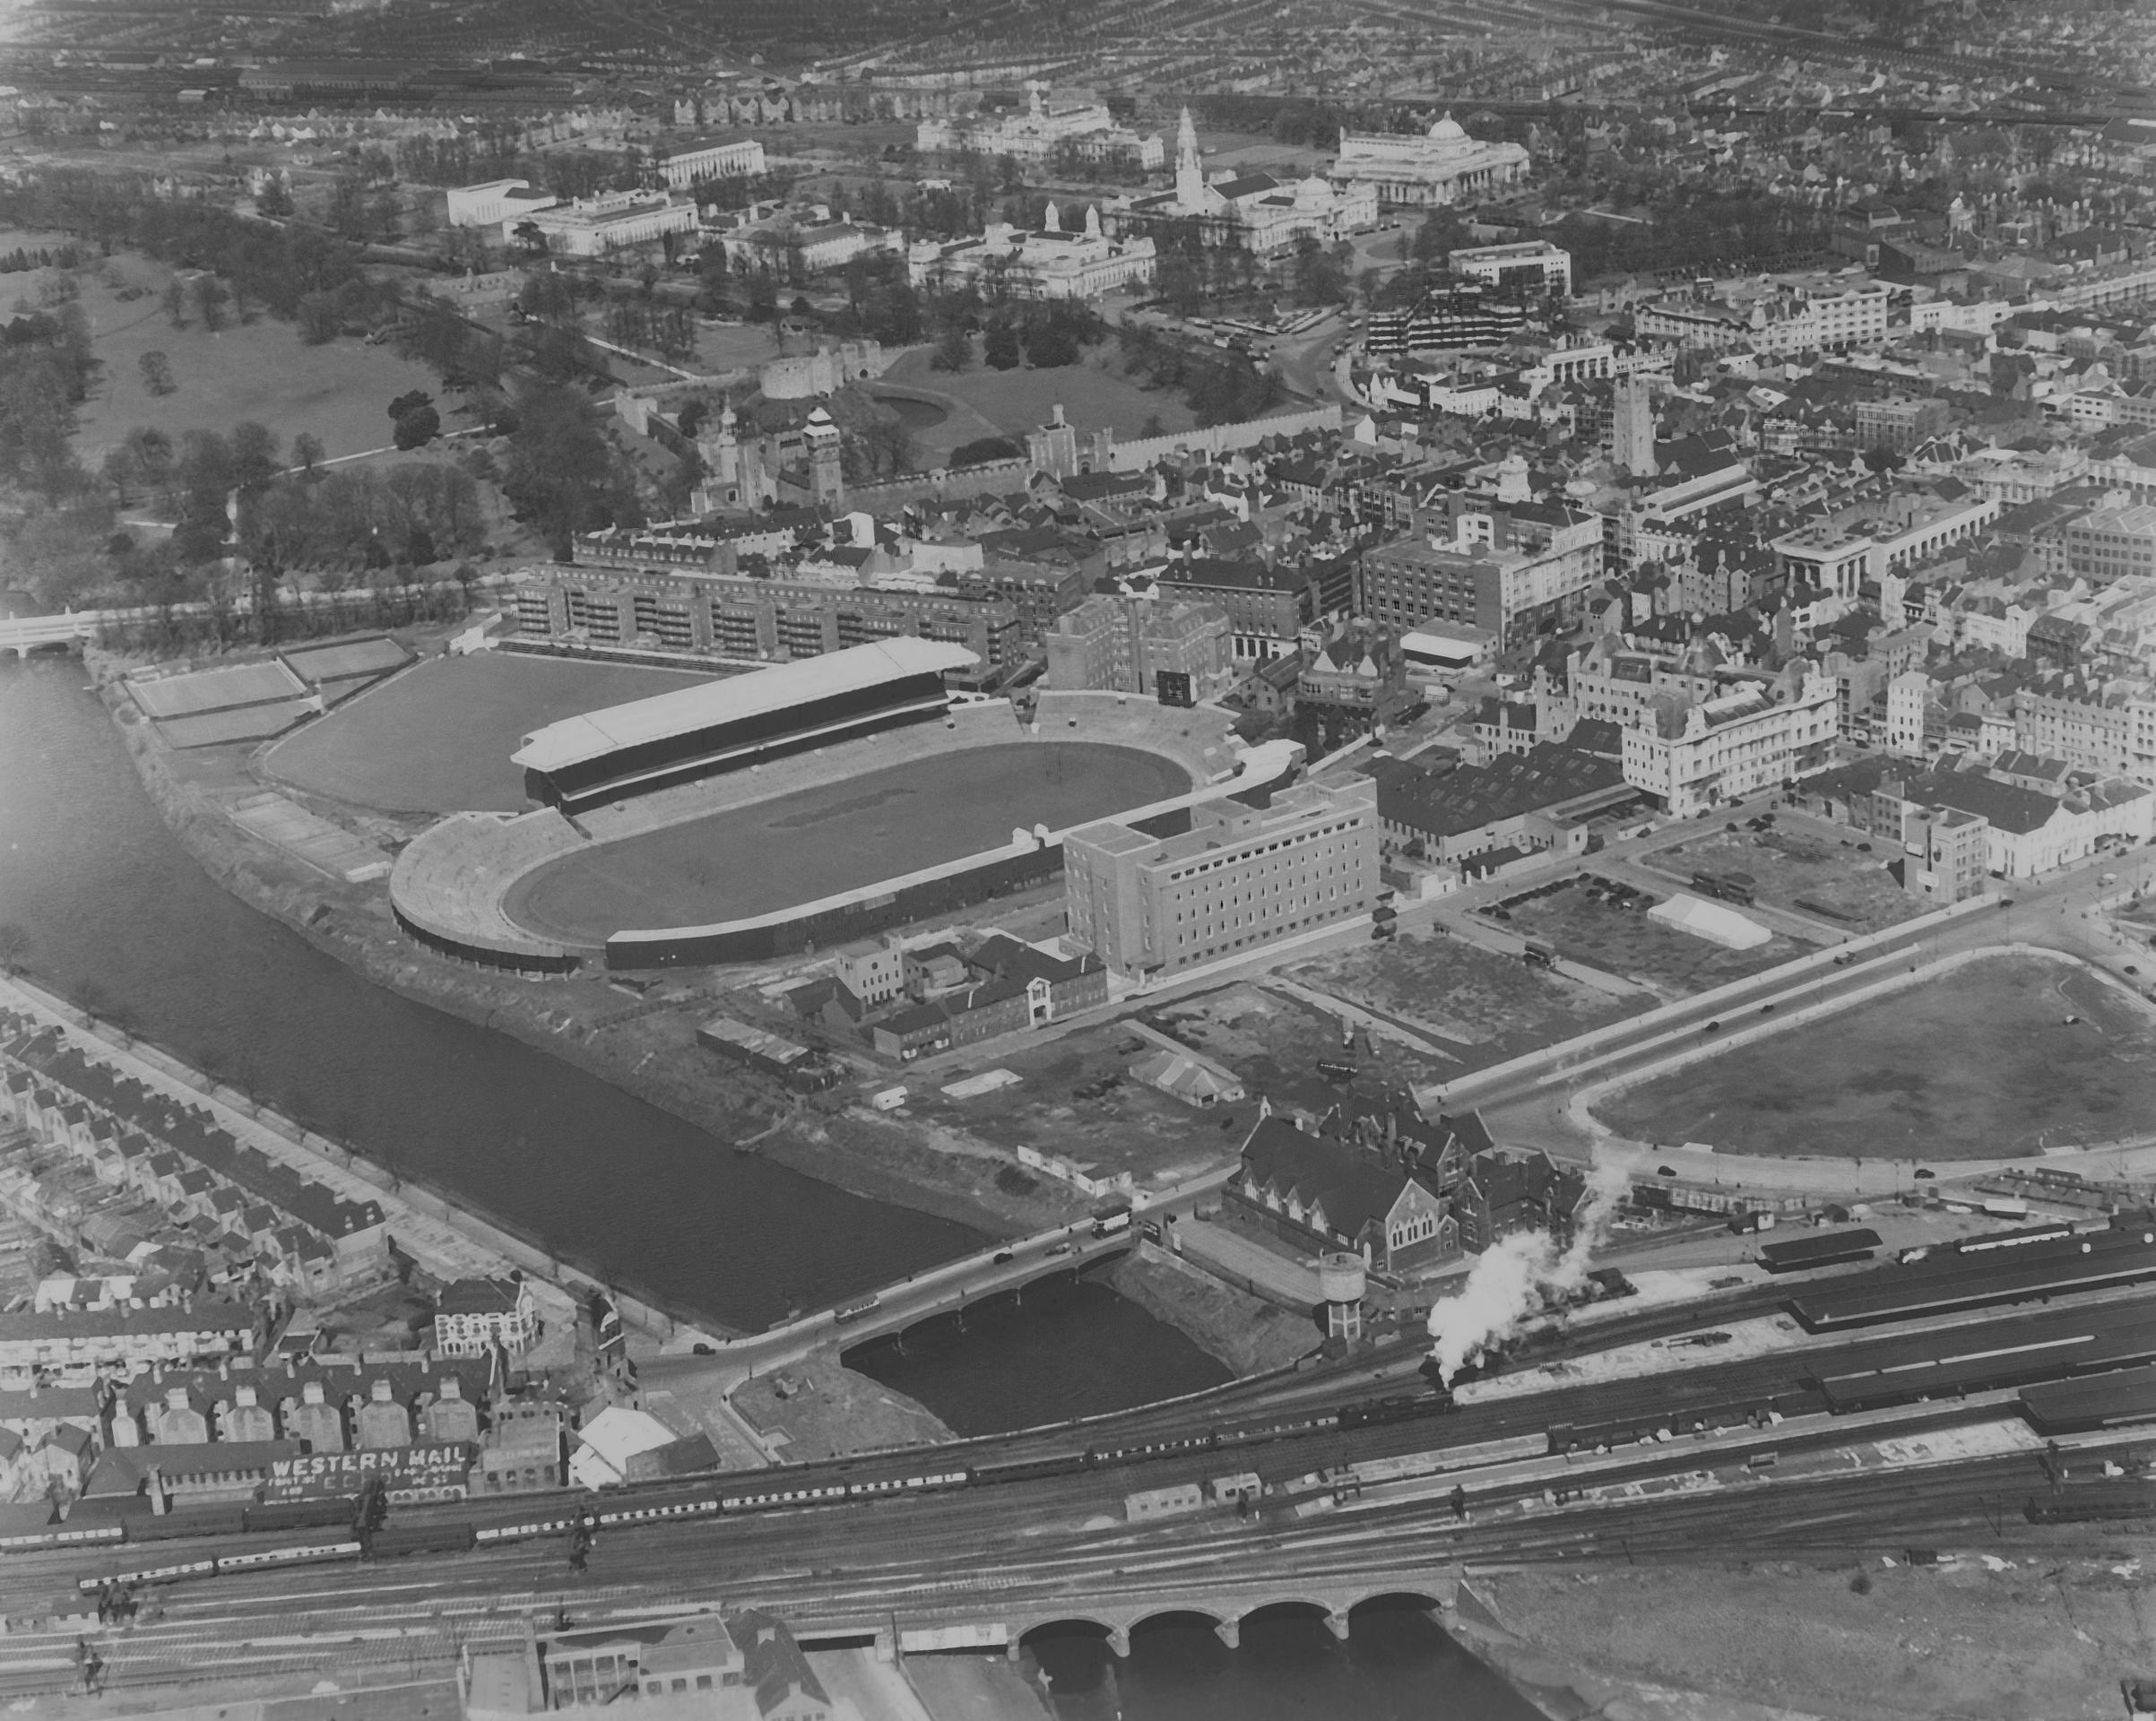 Aerial photo of Cardiff Arms Park from 1950